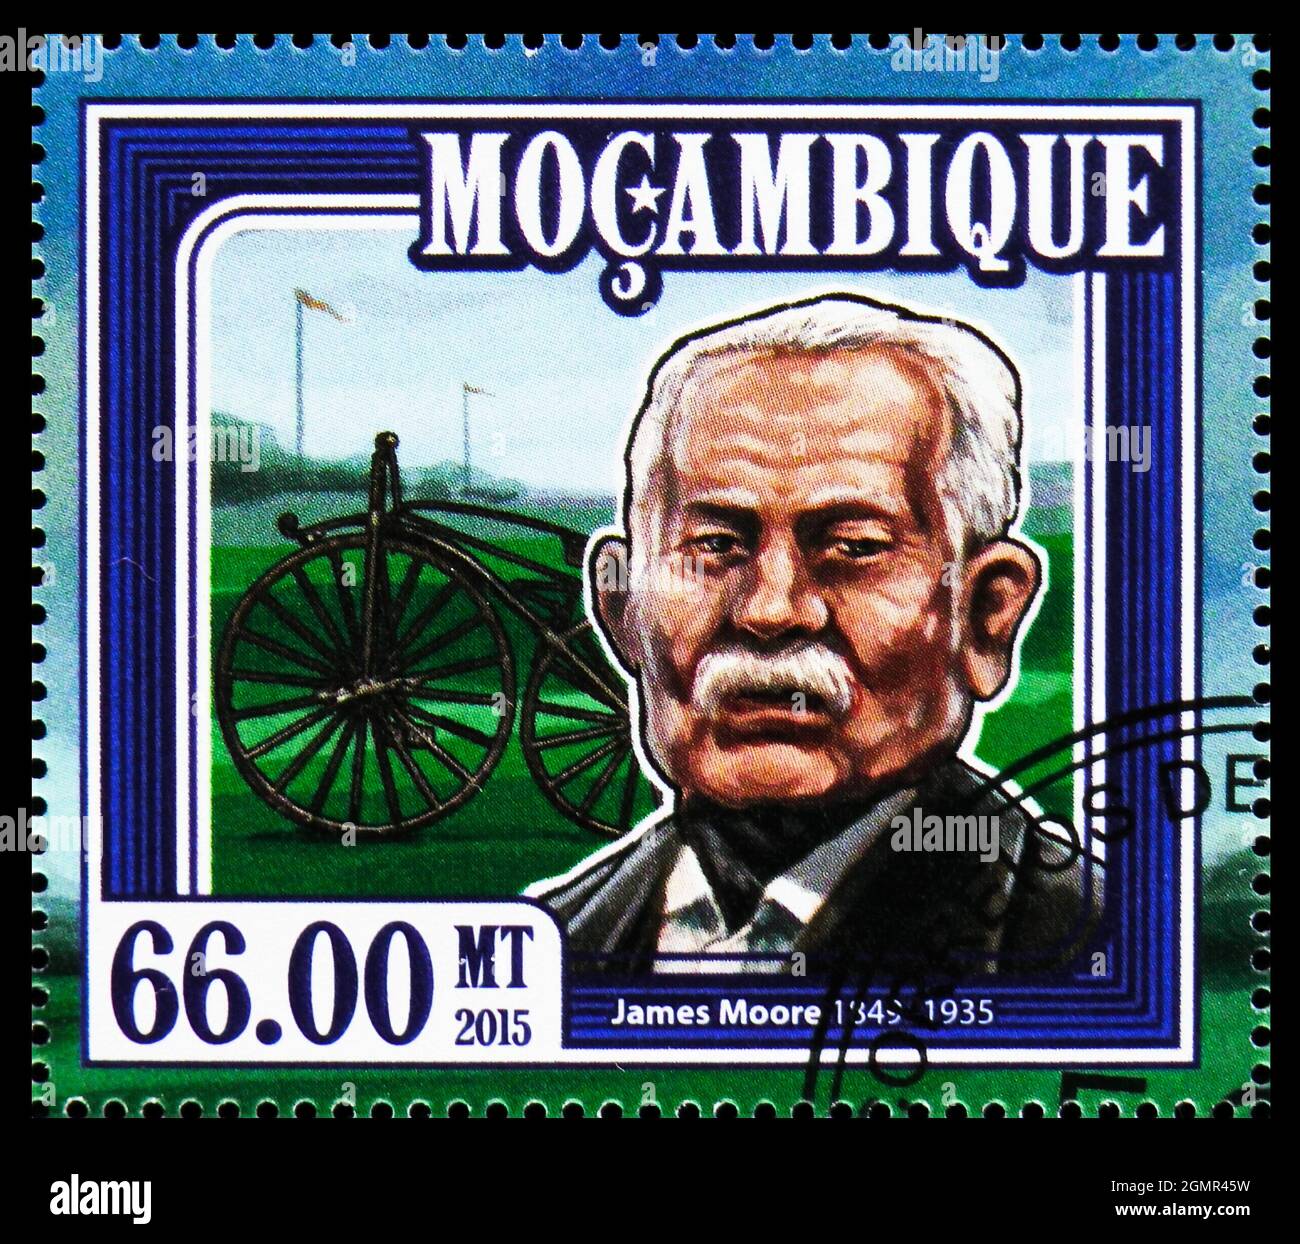 MOSCOW, RUSSIA - JULY 31, 2021: Postage stamp printed in Mozambique shows James Moore (1849-1935), 80th Anniversary of the Death of James Moore (1849- Stock Photo